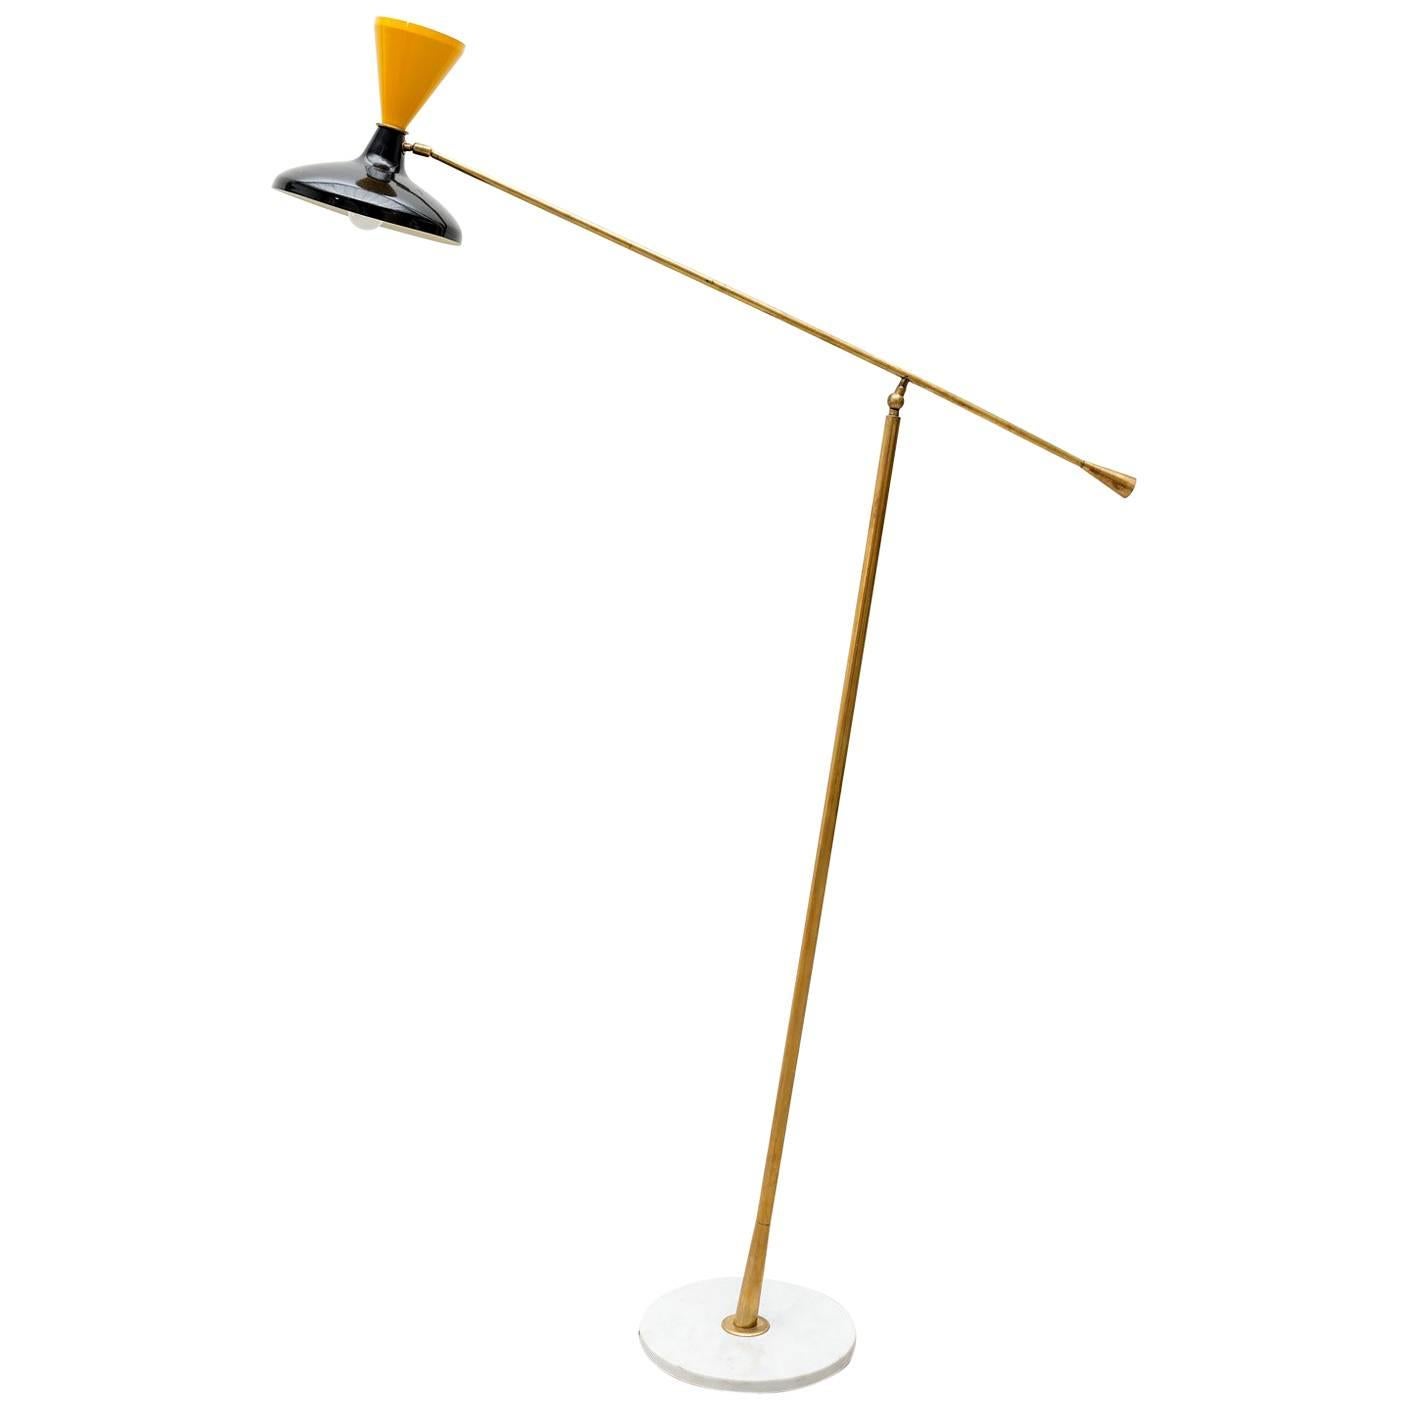 Brass Italian Floor Lamp with Yellow and Black Enameled Shade and Marble Base